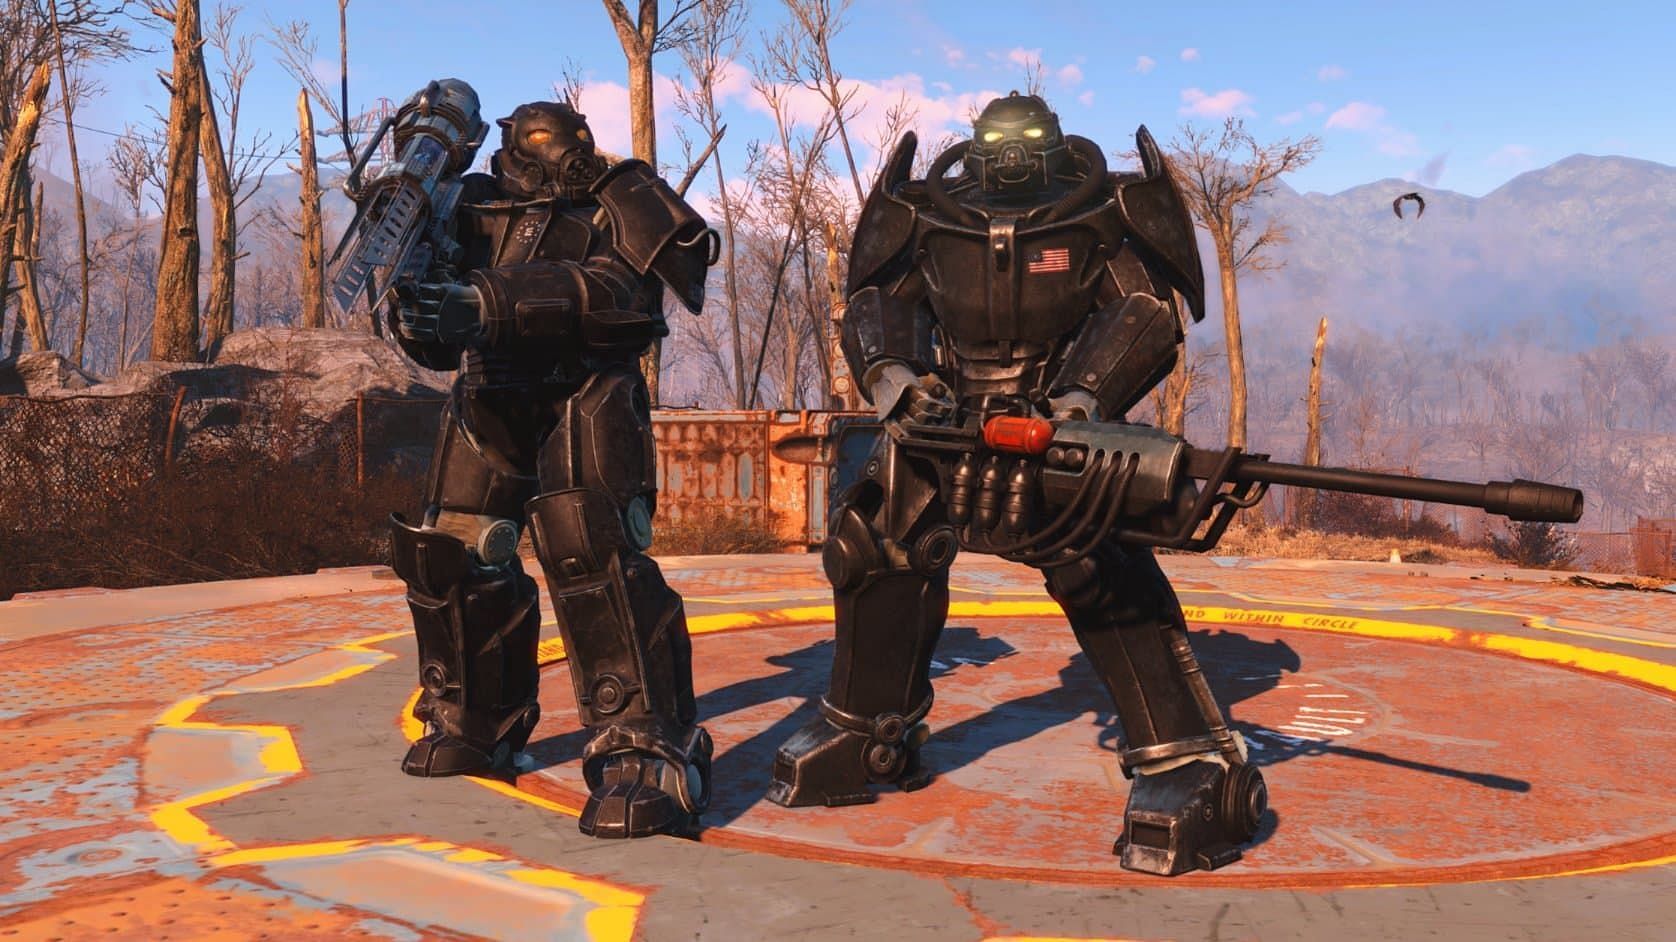 Get a number of all-new weapons and armor with the Fallout 4 Next-gen update (Image via Bethesda Softworks)